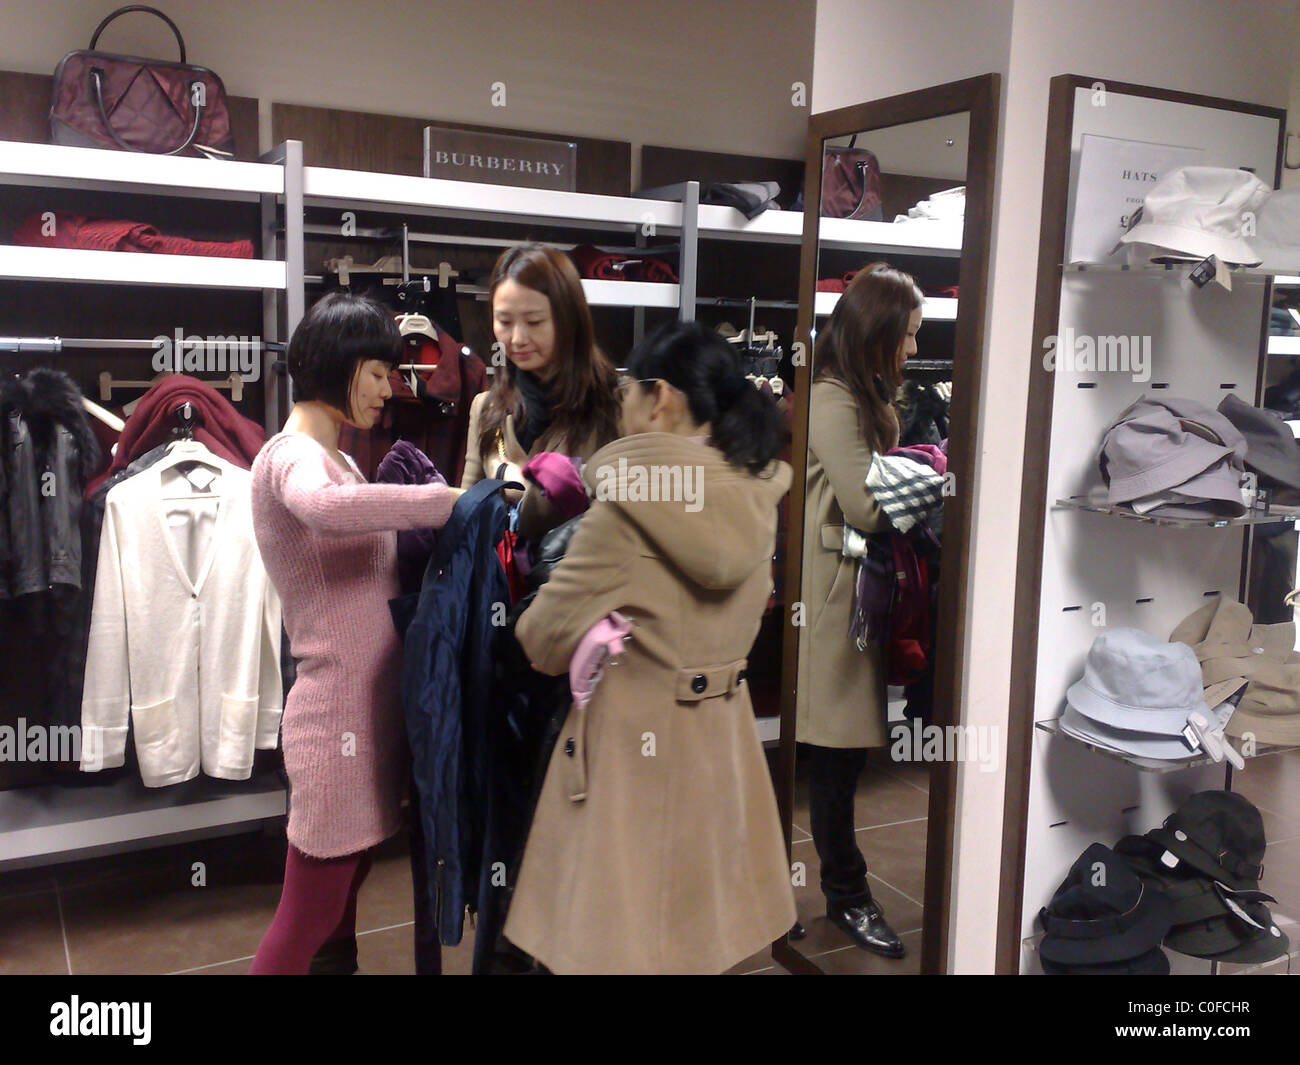 BURBERRY OUTLET DISCOUNT STORE 